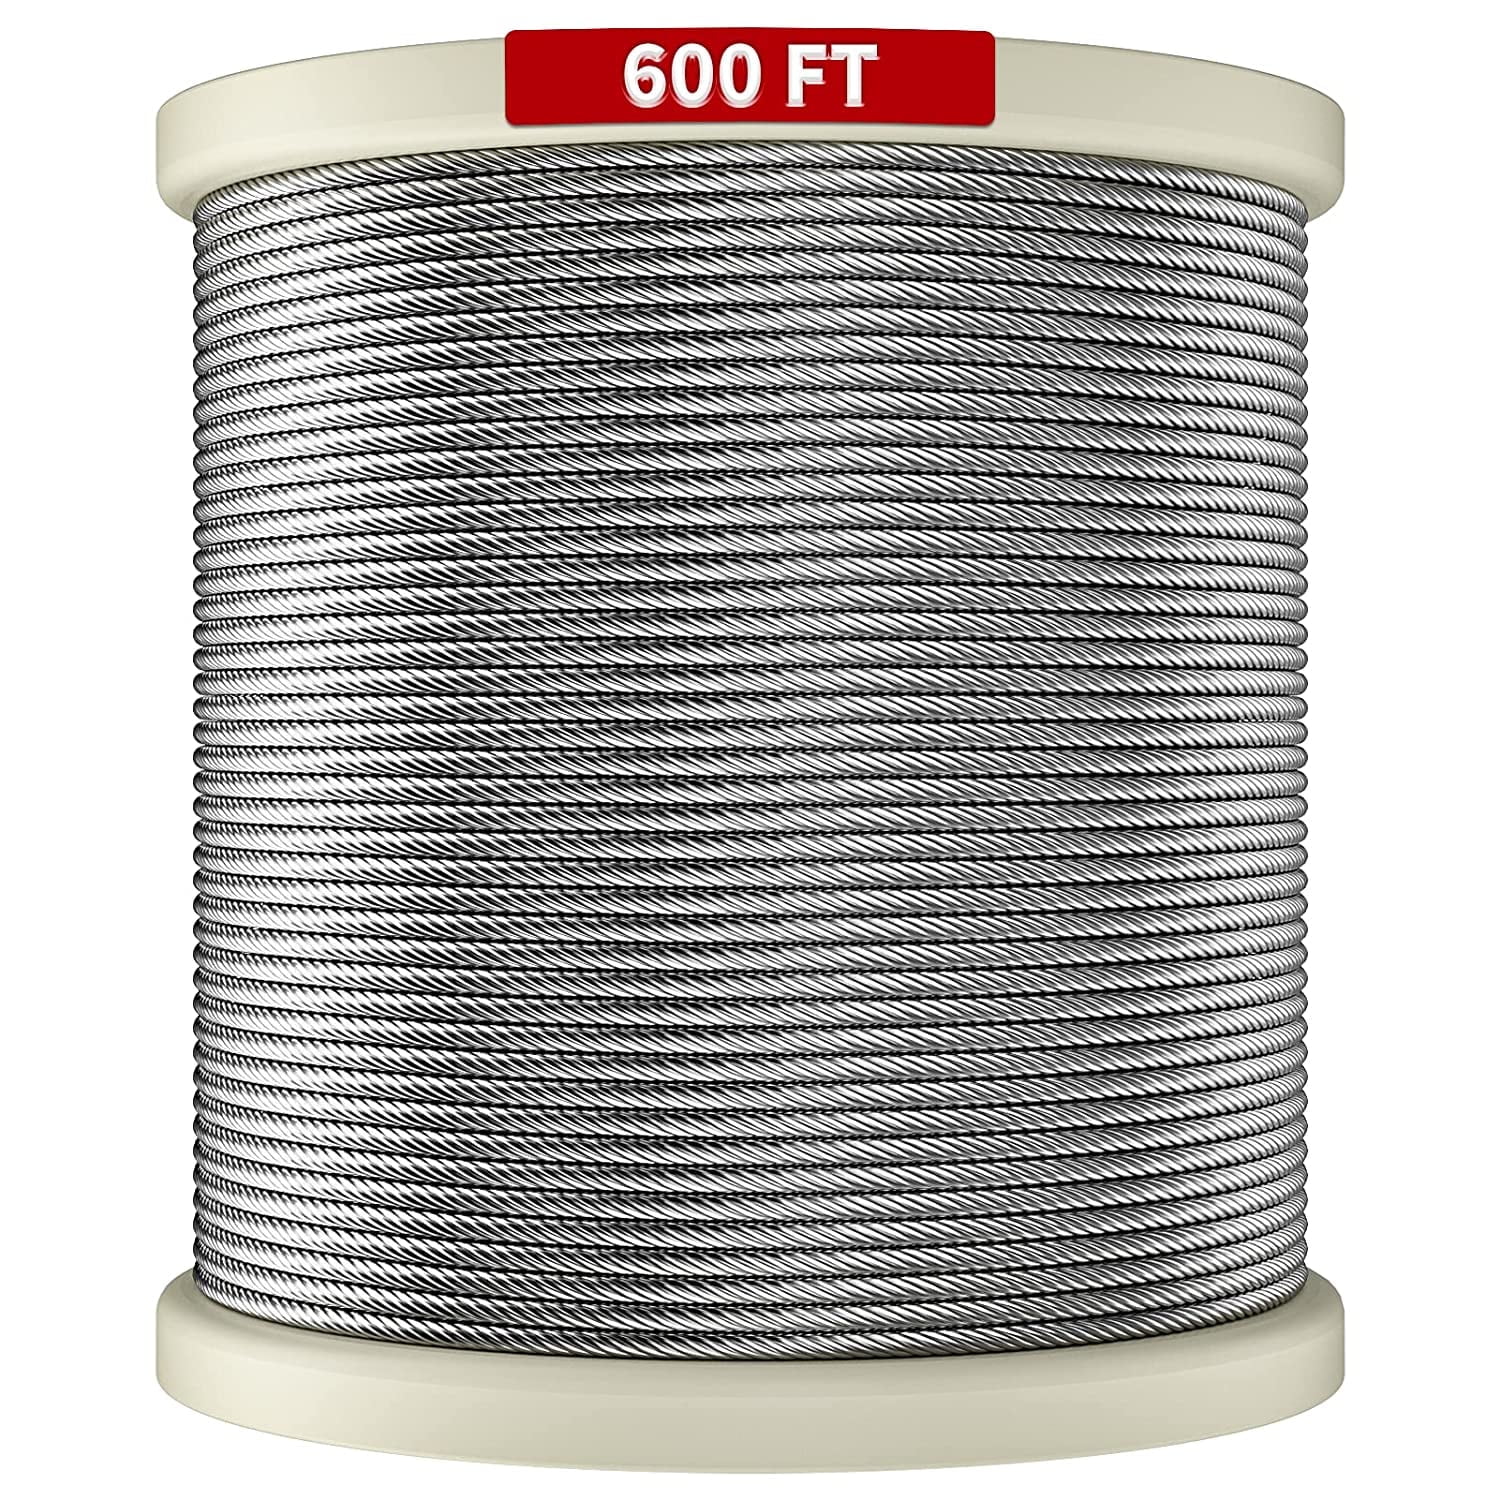 Stainless Steel WIRE ROPE 316, 7x7, PVC, 5/32 in. x 1/4 in. 1000' WHITE